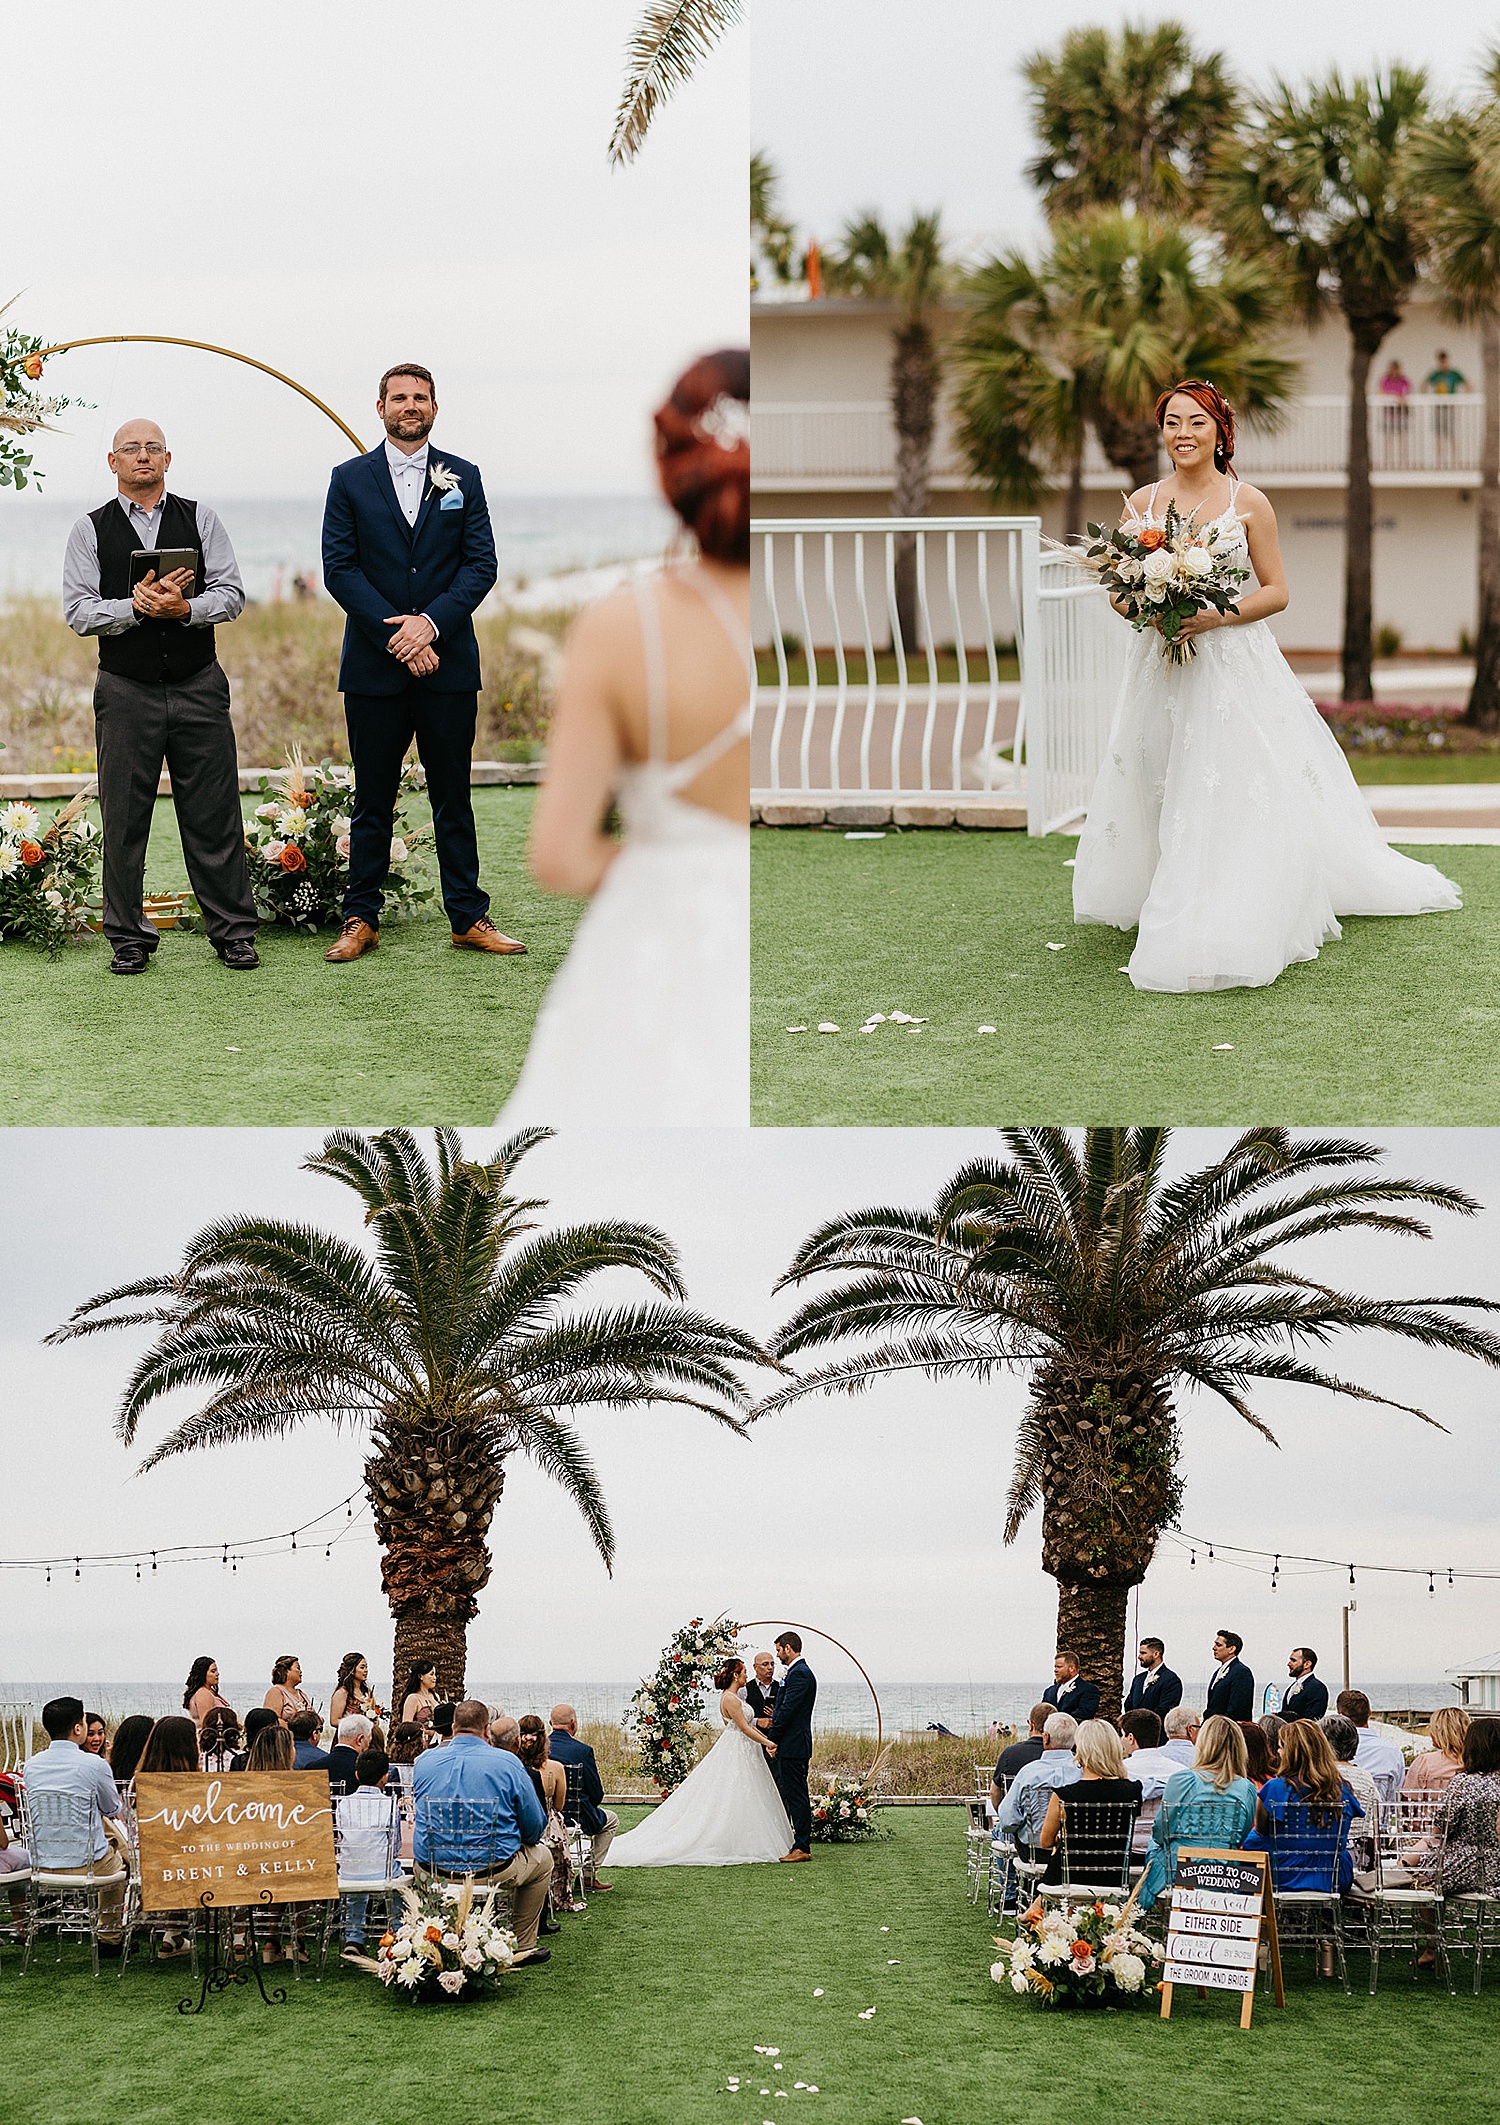 Bride walking down aisle to see groom holding floral wedding bouquet in front of friends and family on beach